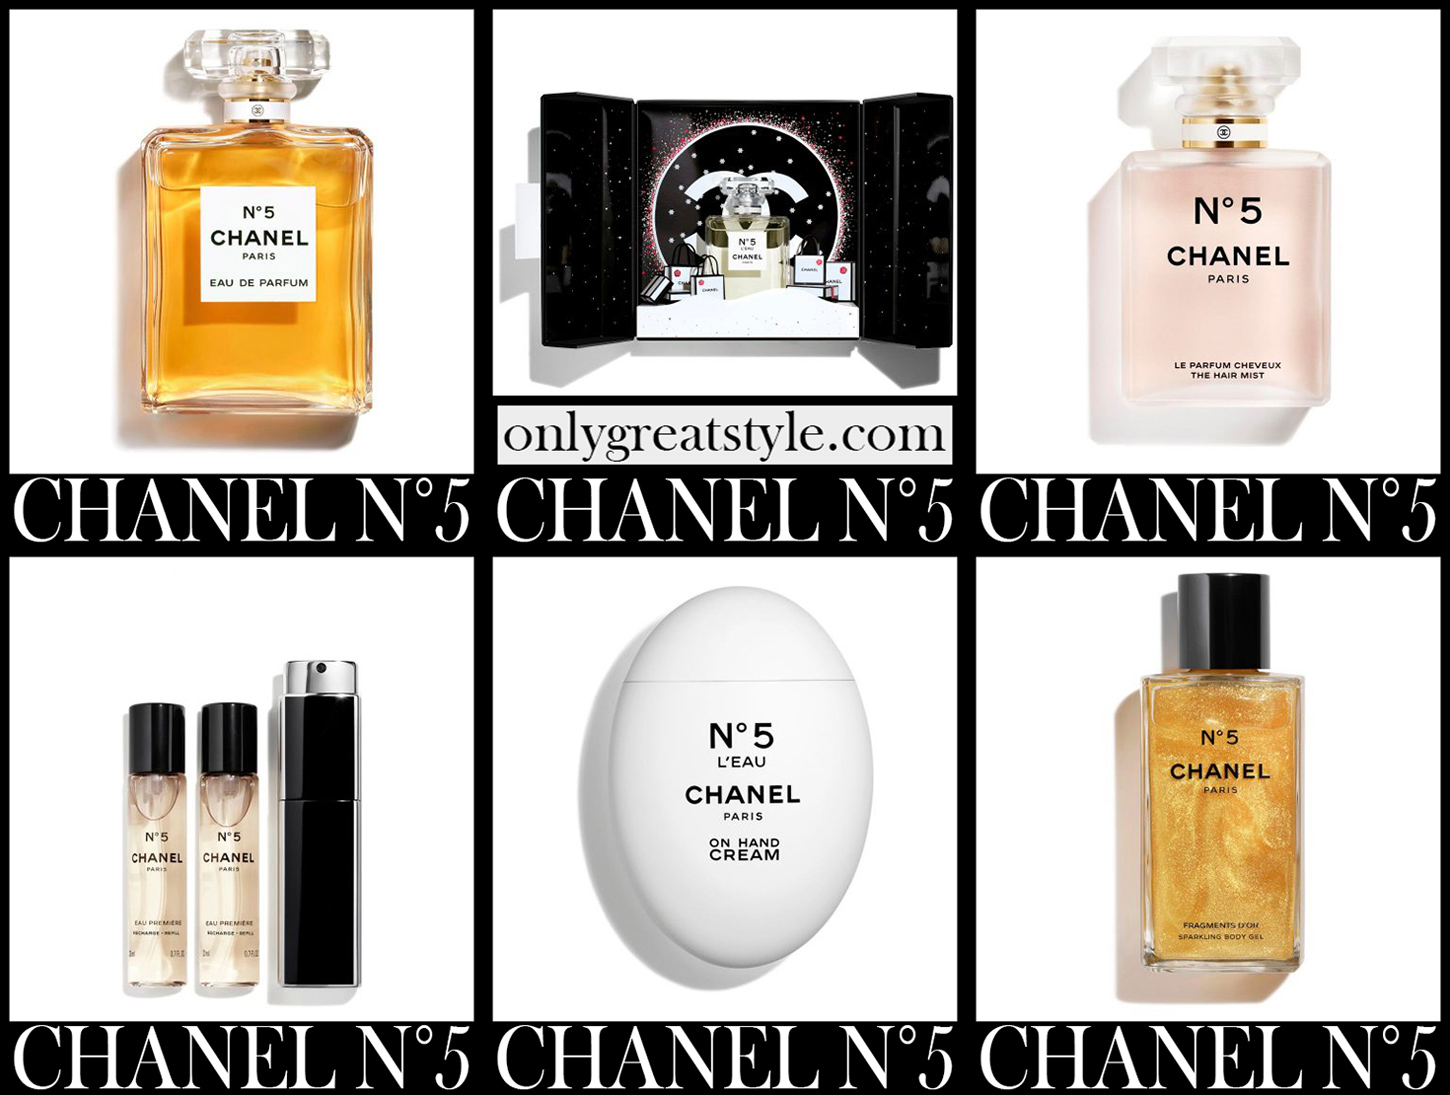 Chanel N°5 perfumes 2021 new arrivals gift ideas for women